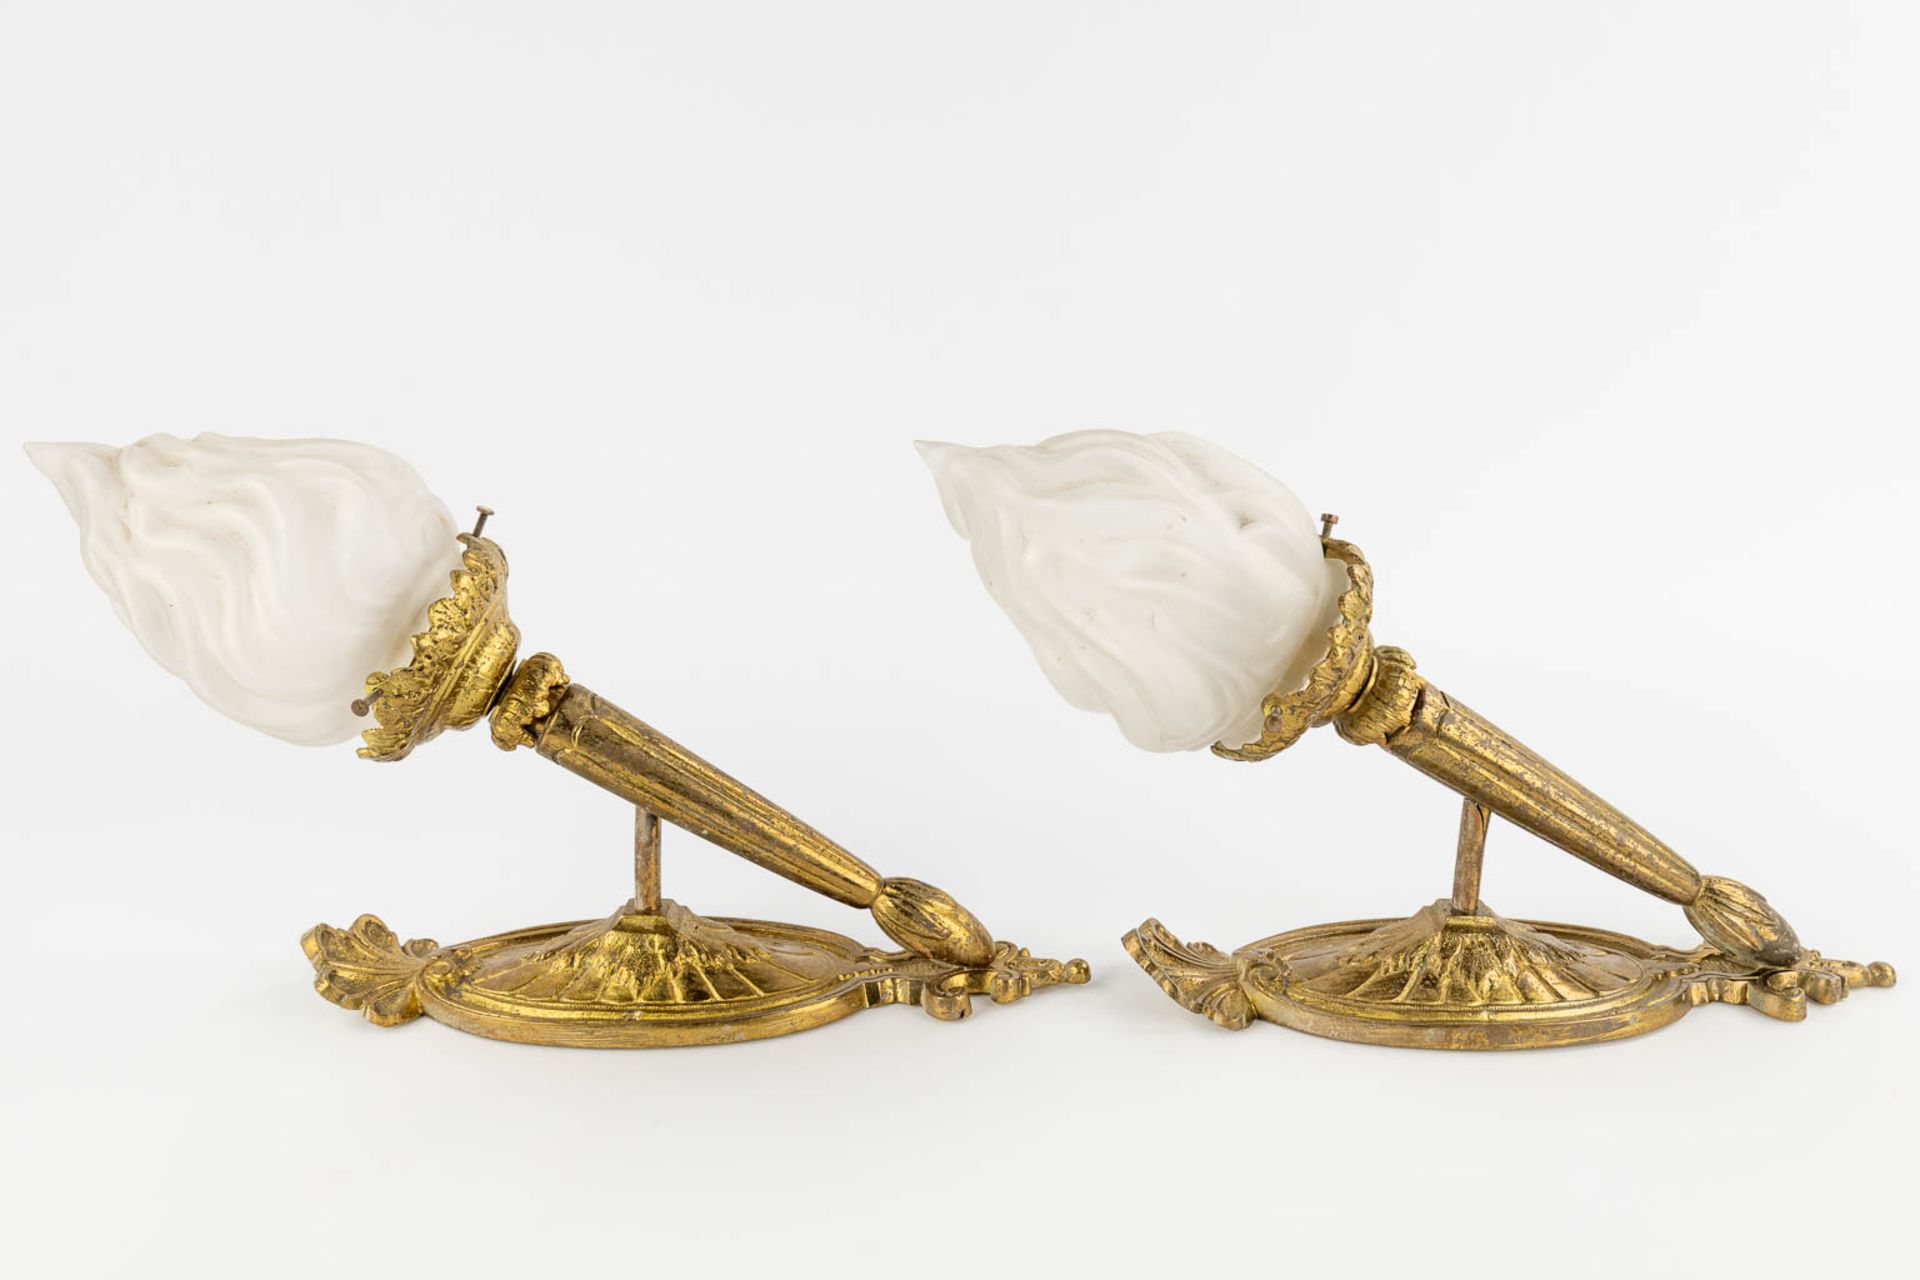 A pair of wall-mounted gilt bronze torches with a glass shade. Circa 1920. (D:21 x W:9 x H:39 cm) - Image 3 of 13